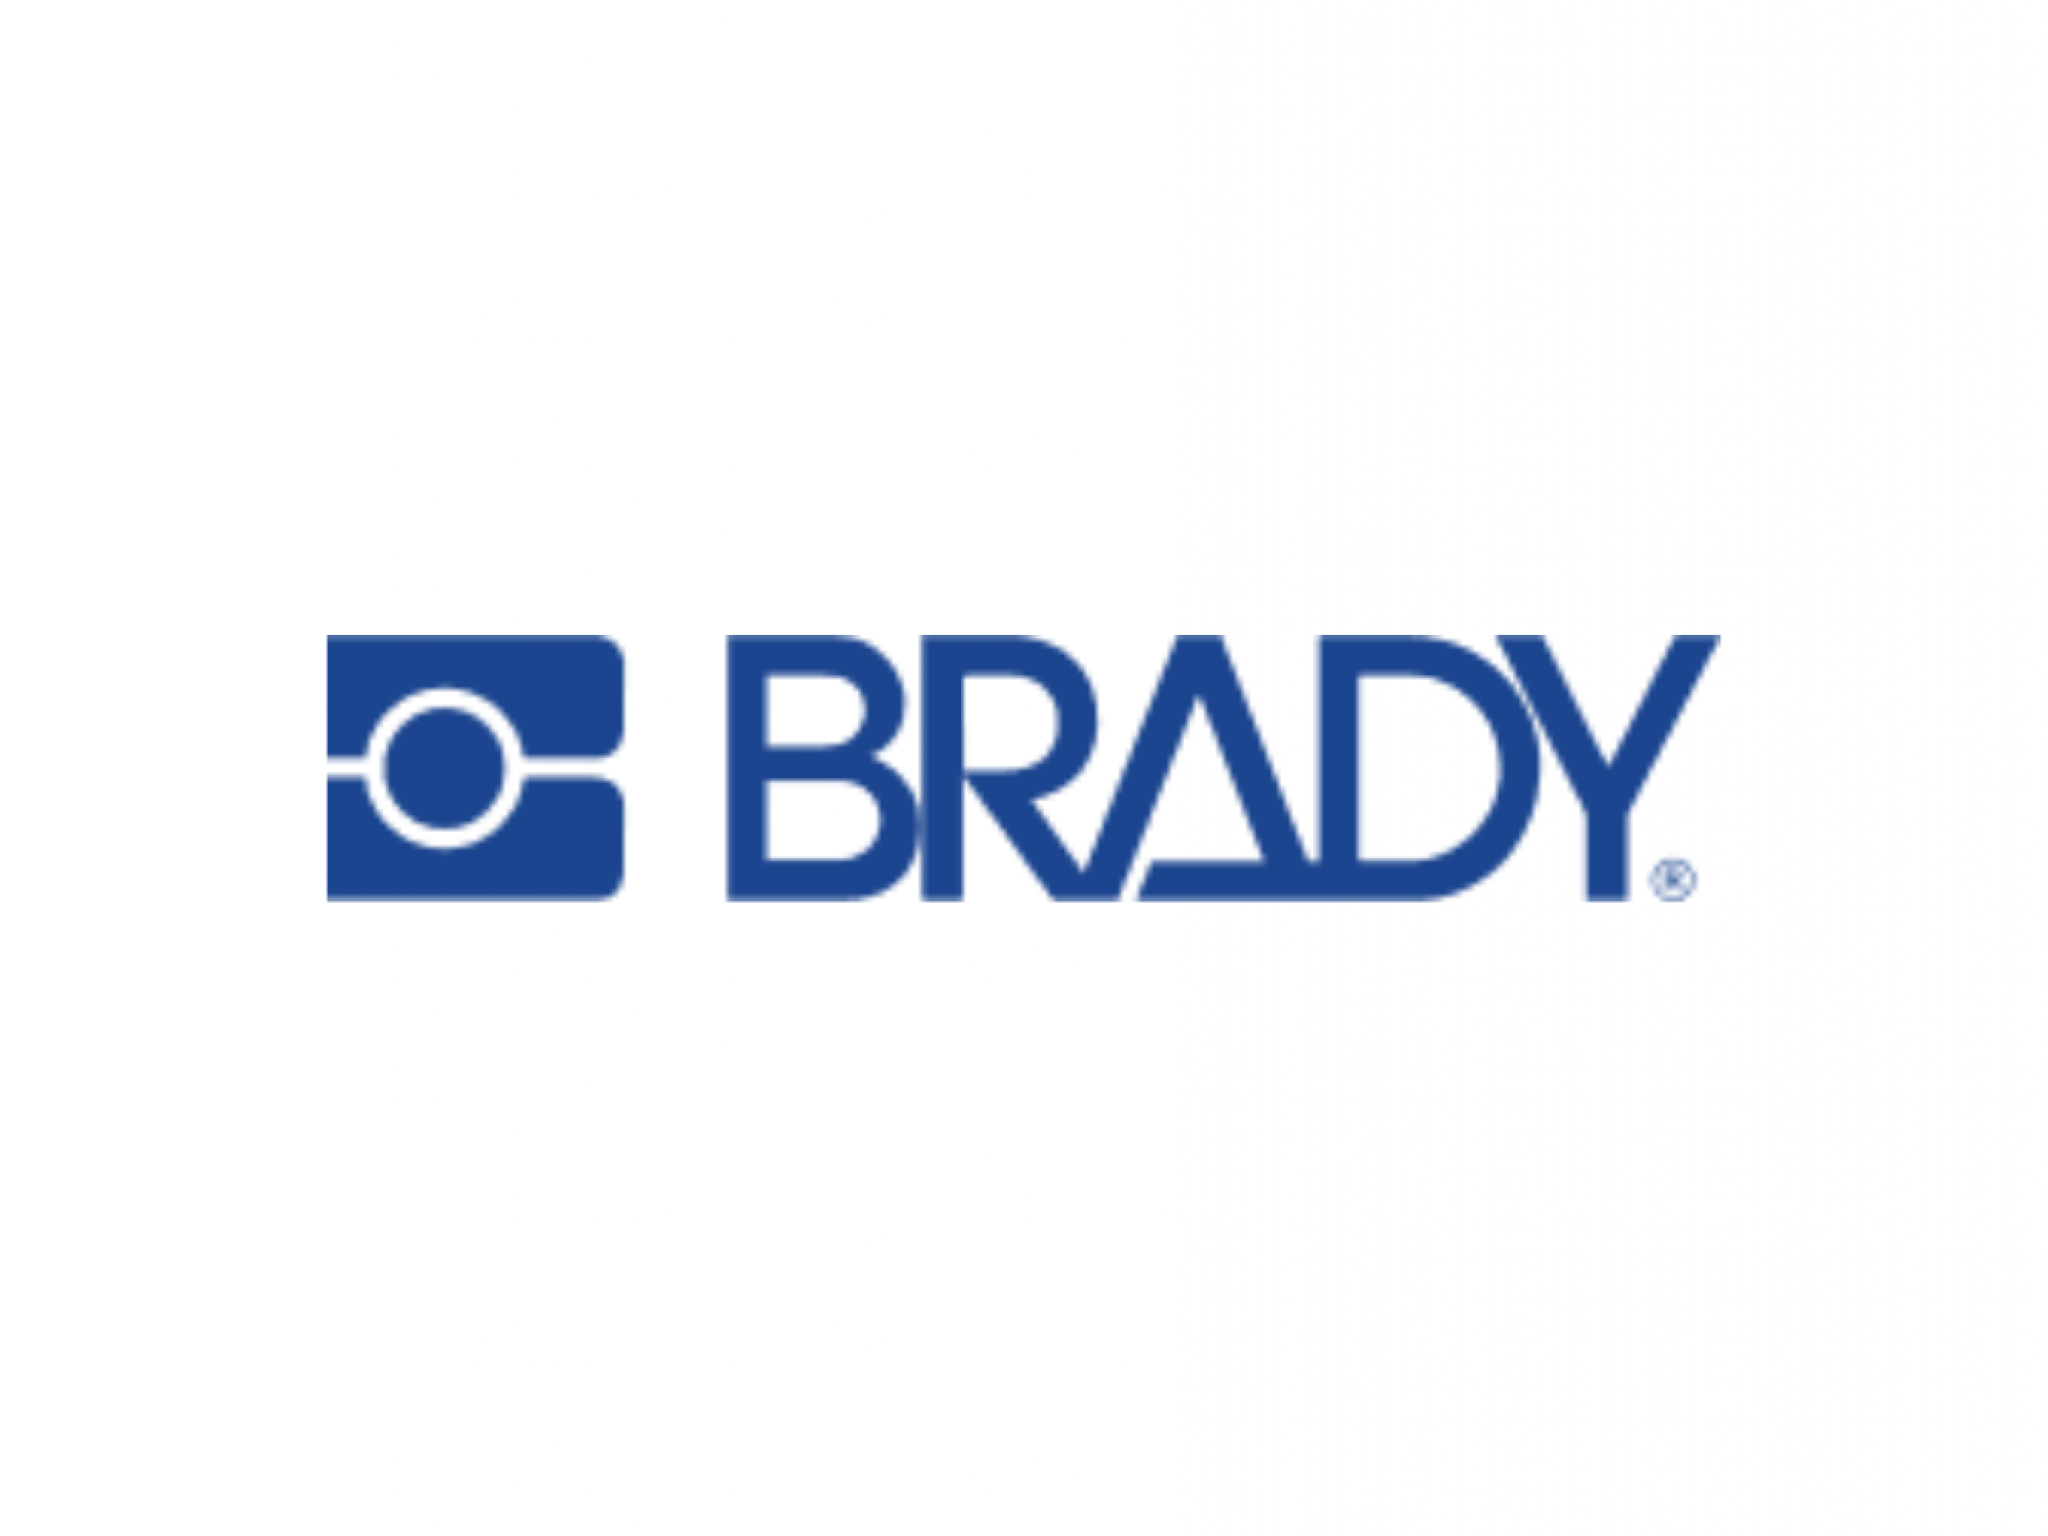  why-brady-shares-are-seeing-blue-skies-today 